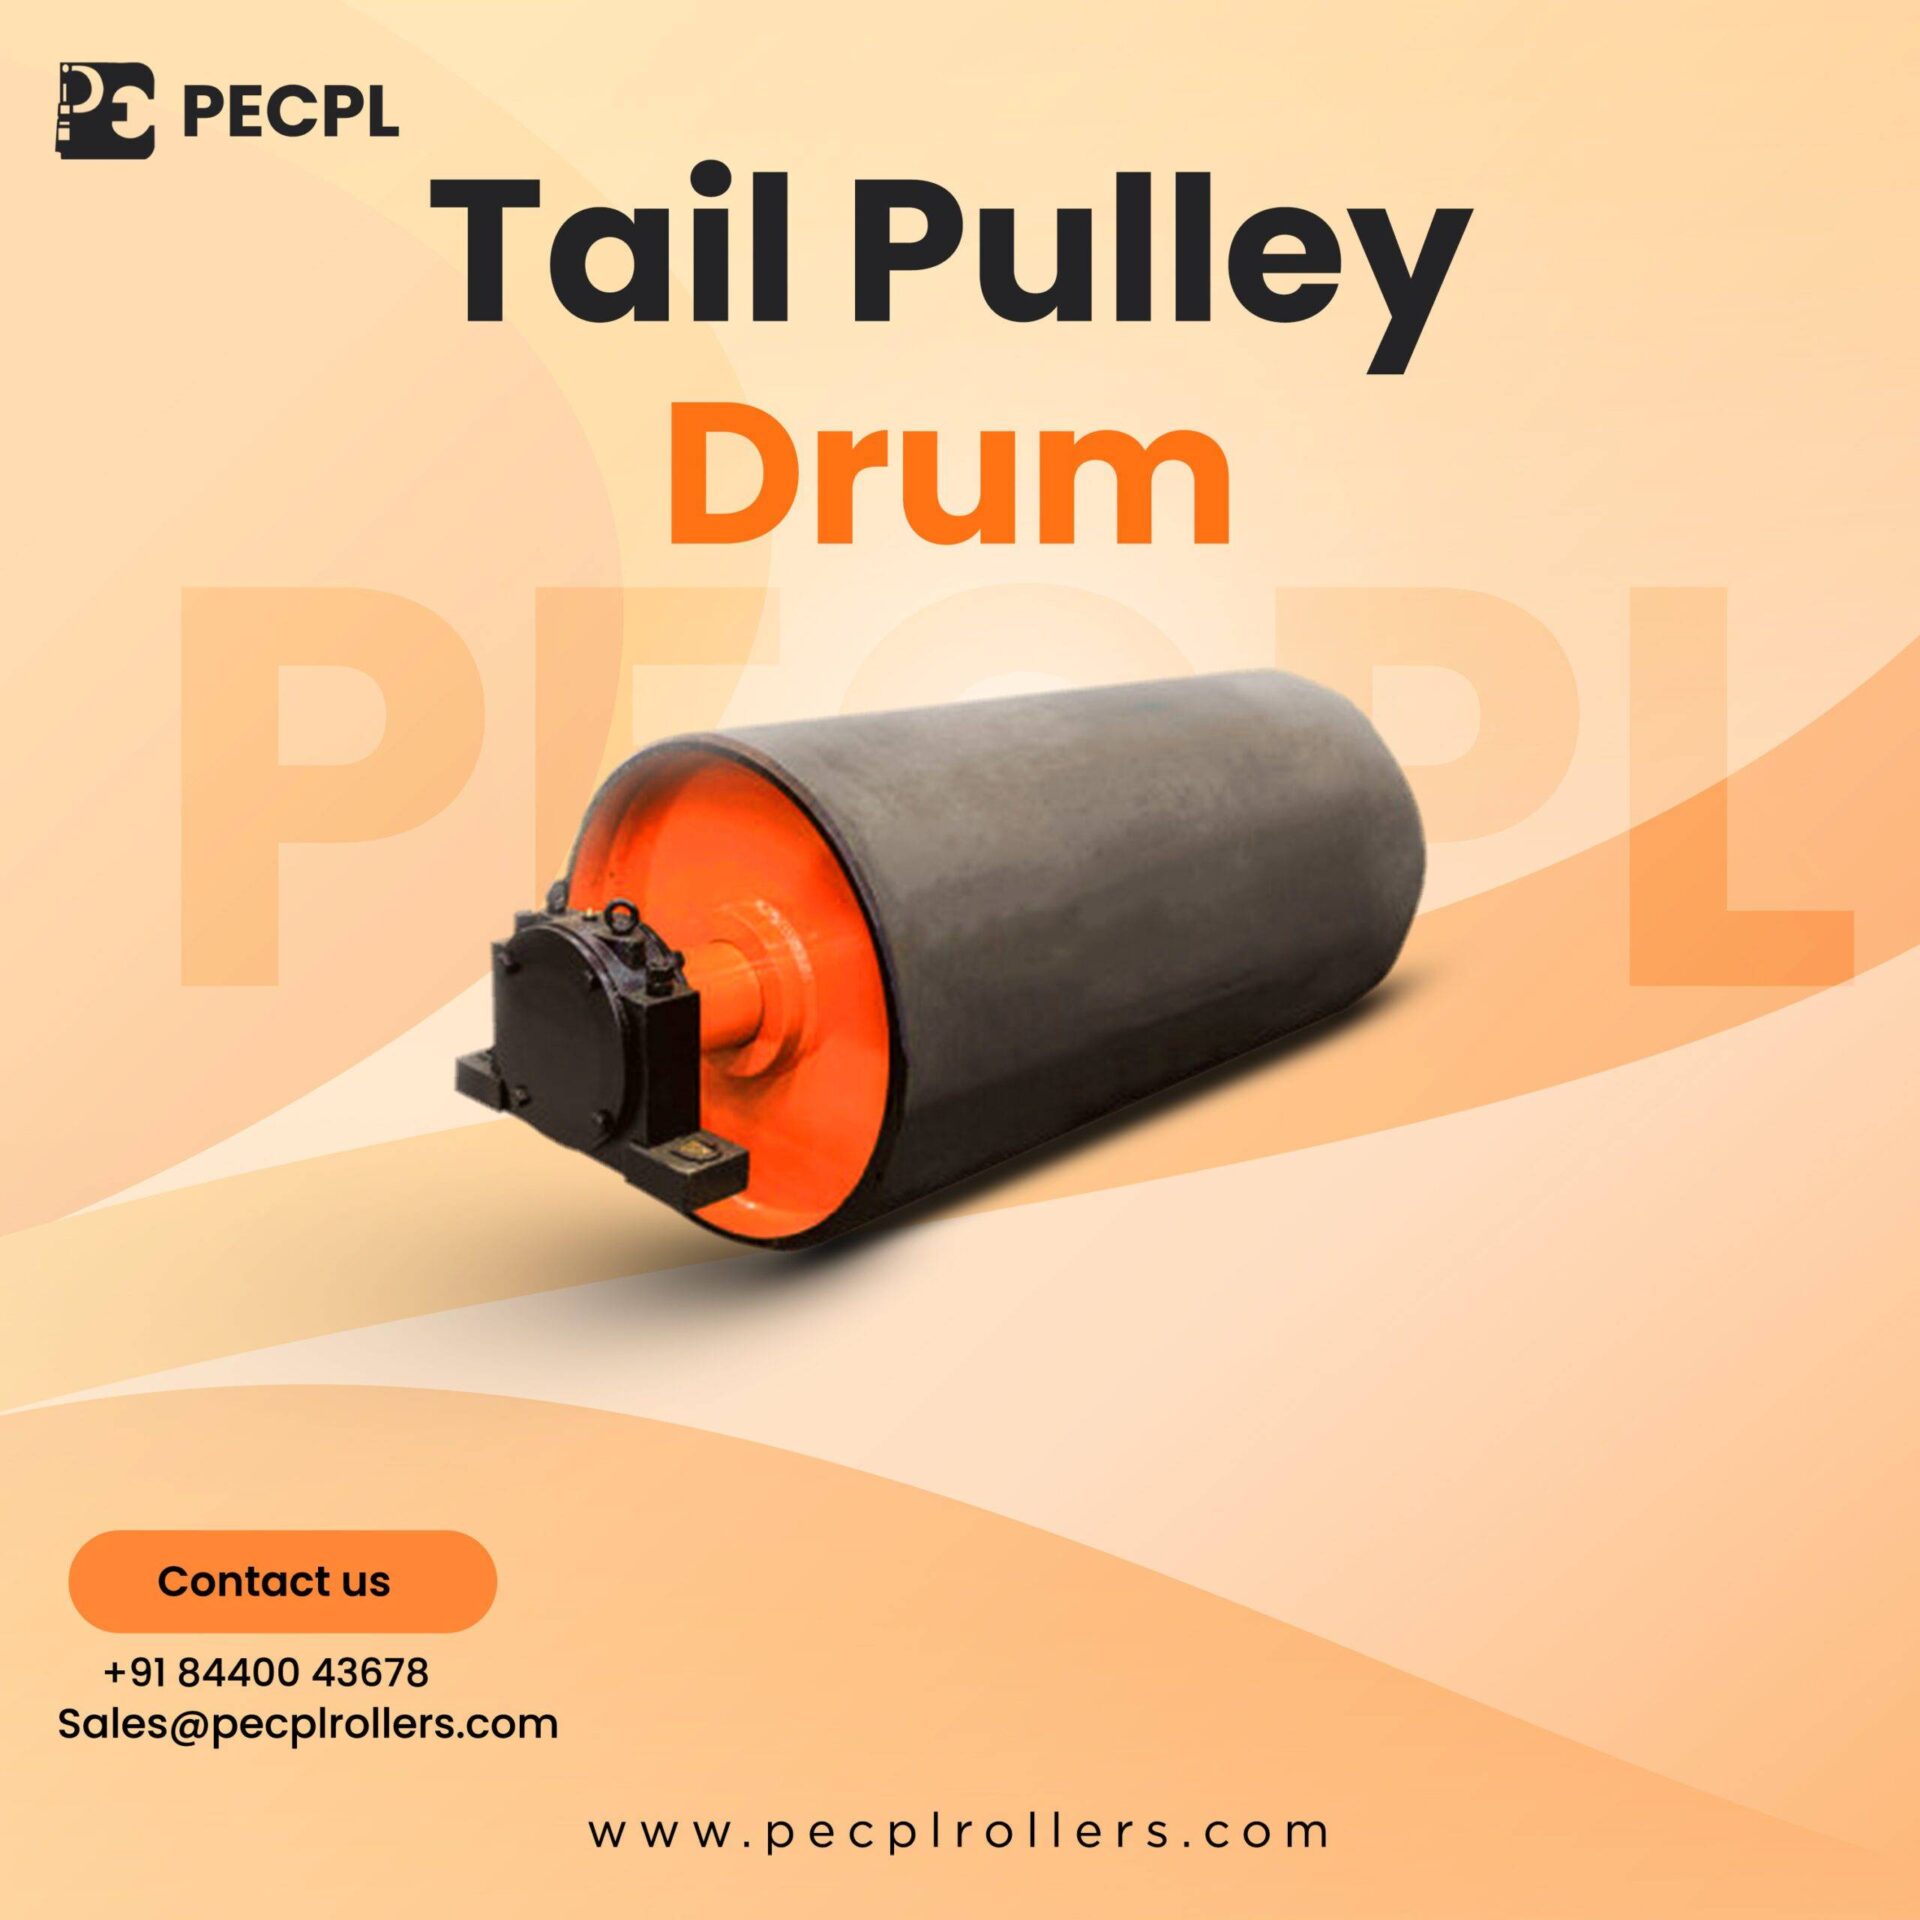 Tail Pulley Drum